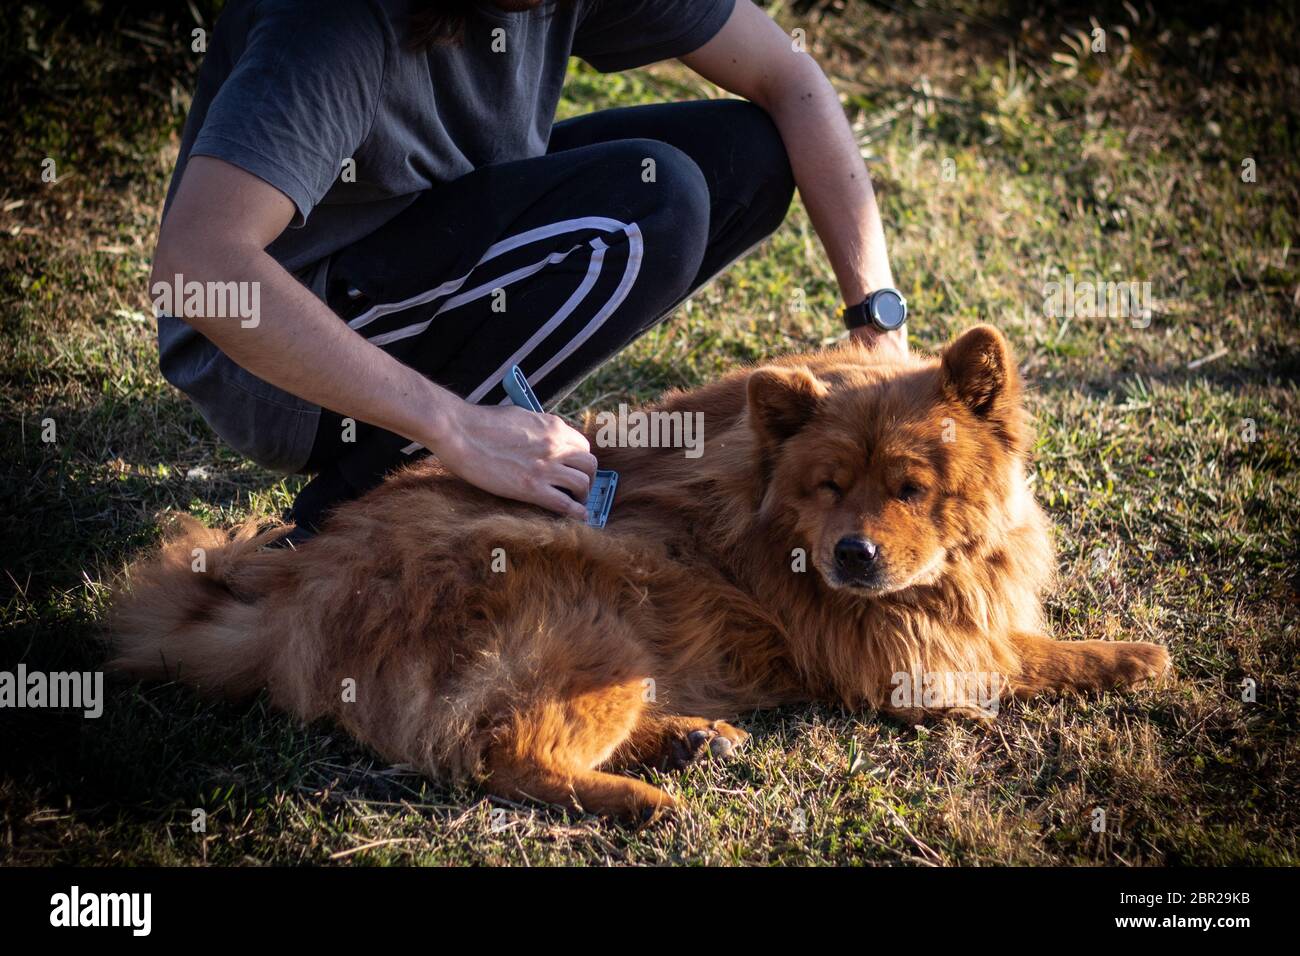 Cute dog being brushed in a sunny day Stock Photo